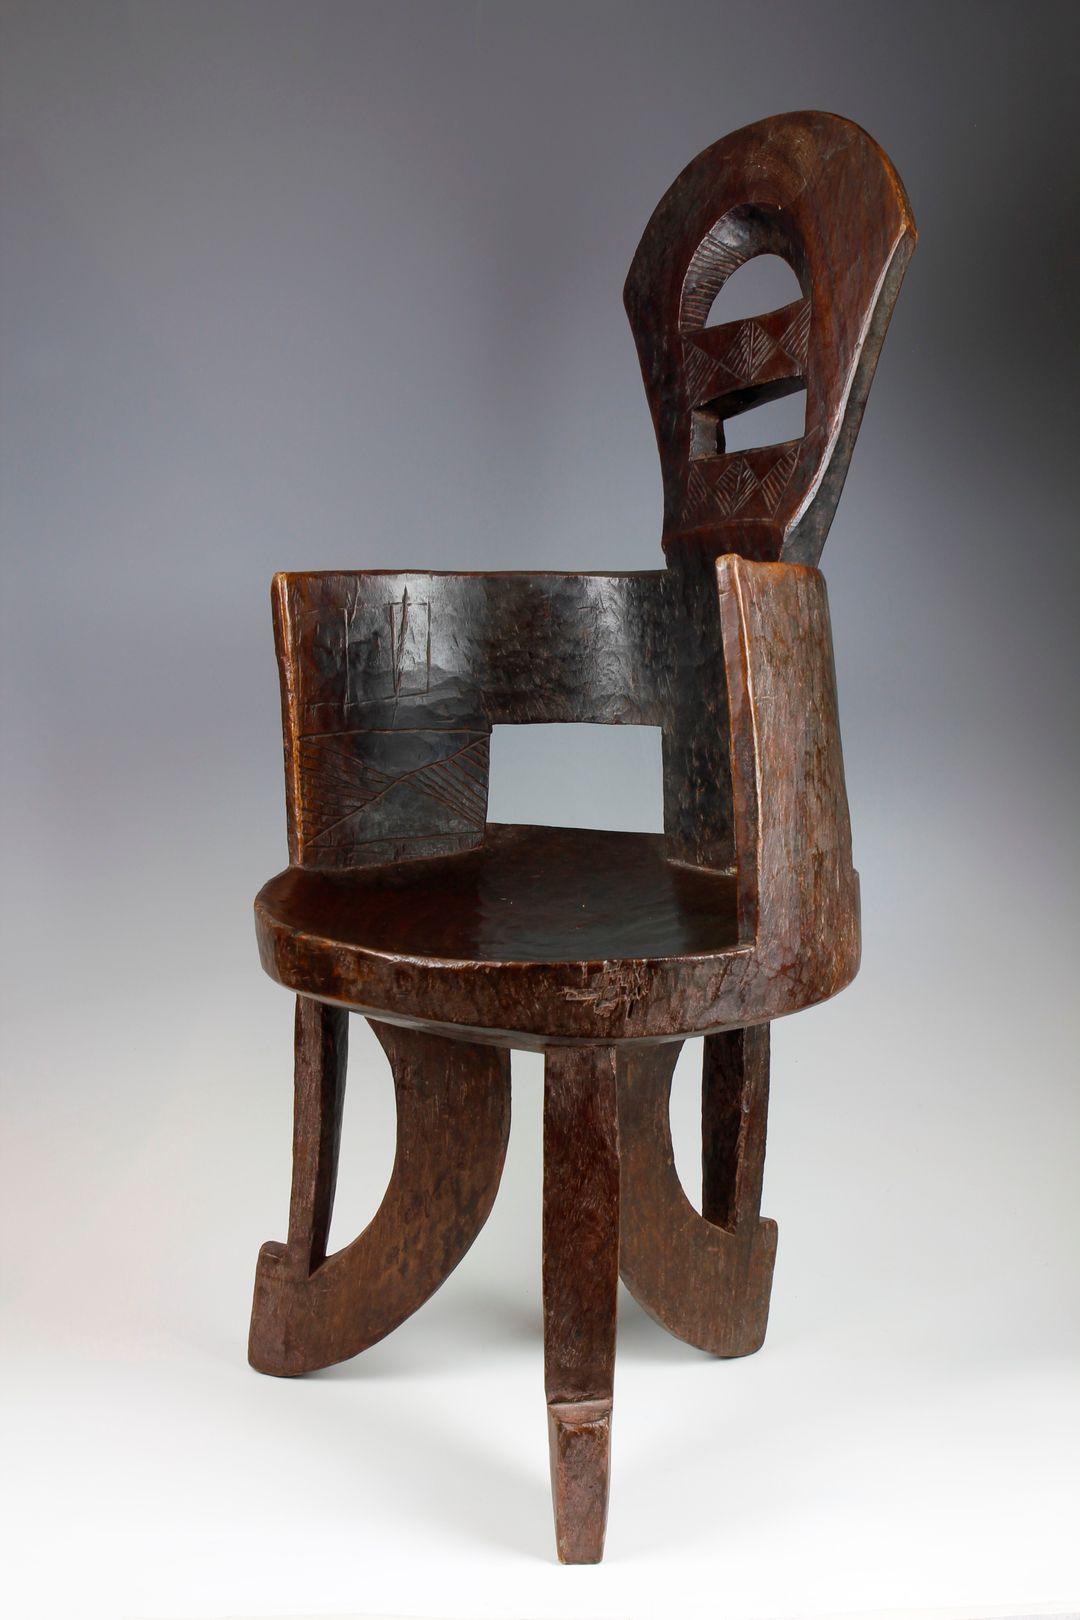 Carved Slender 19th Century High-Backed Ethiopian Chair For Sale